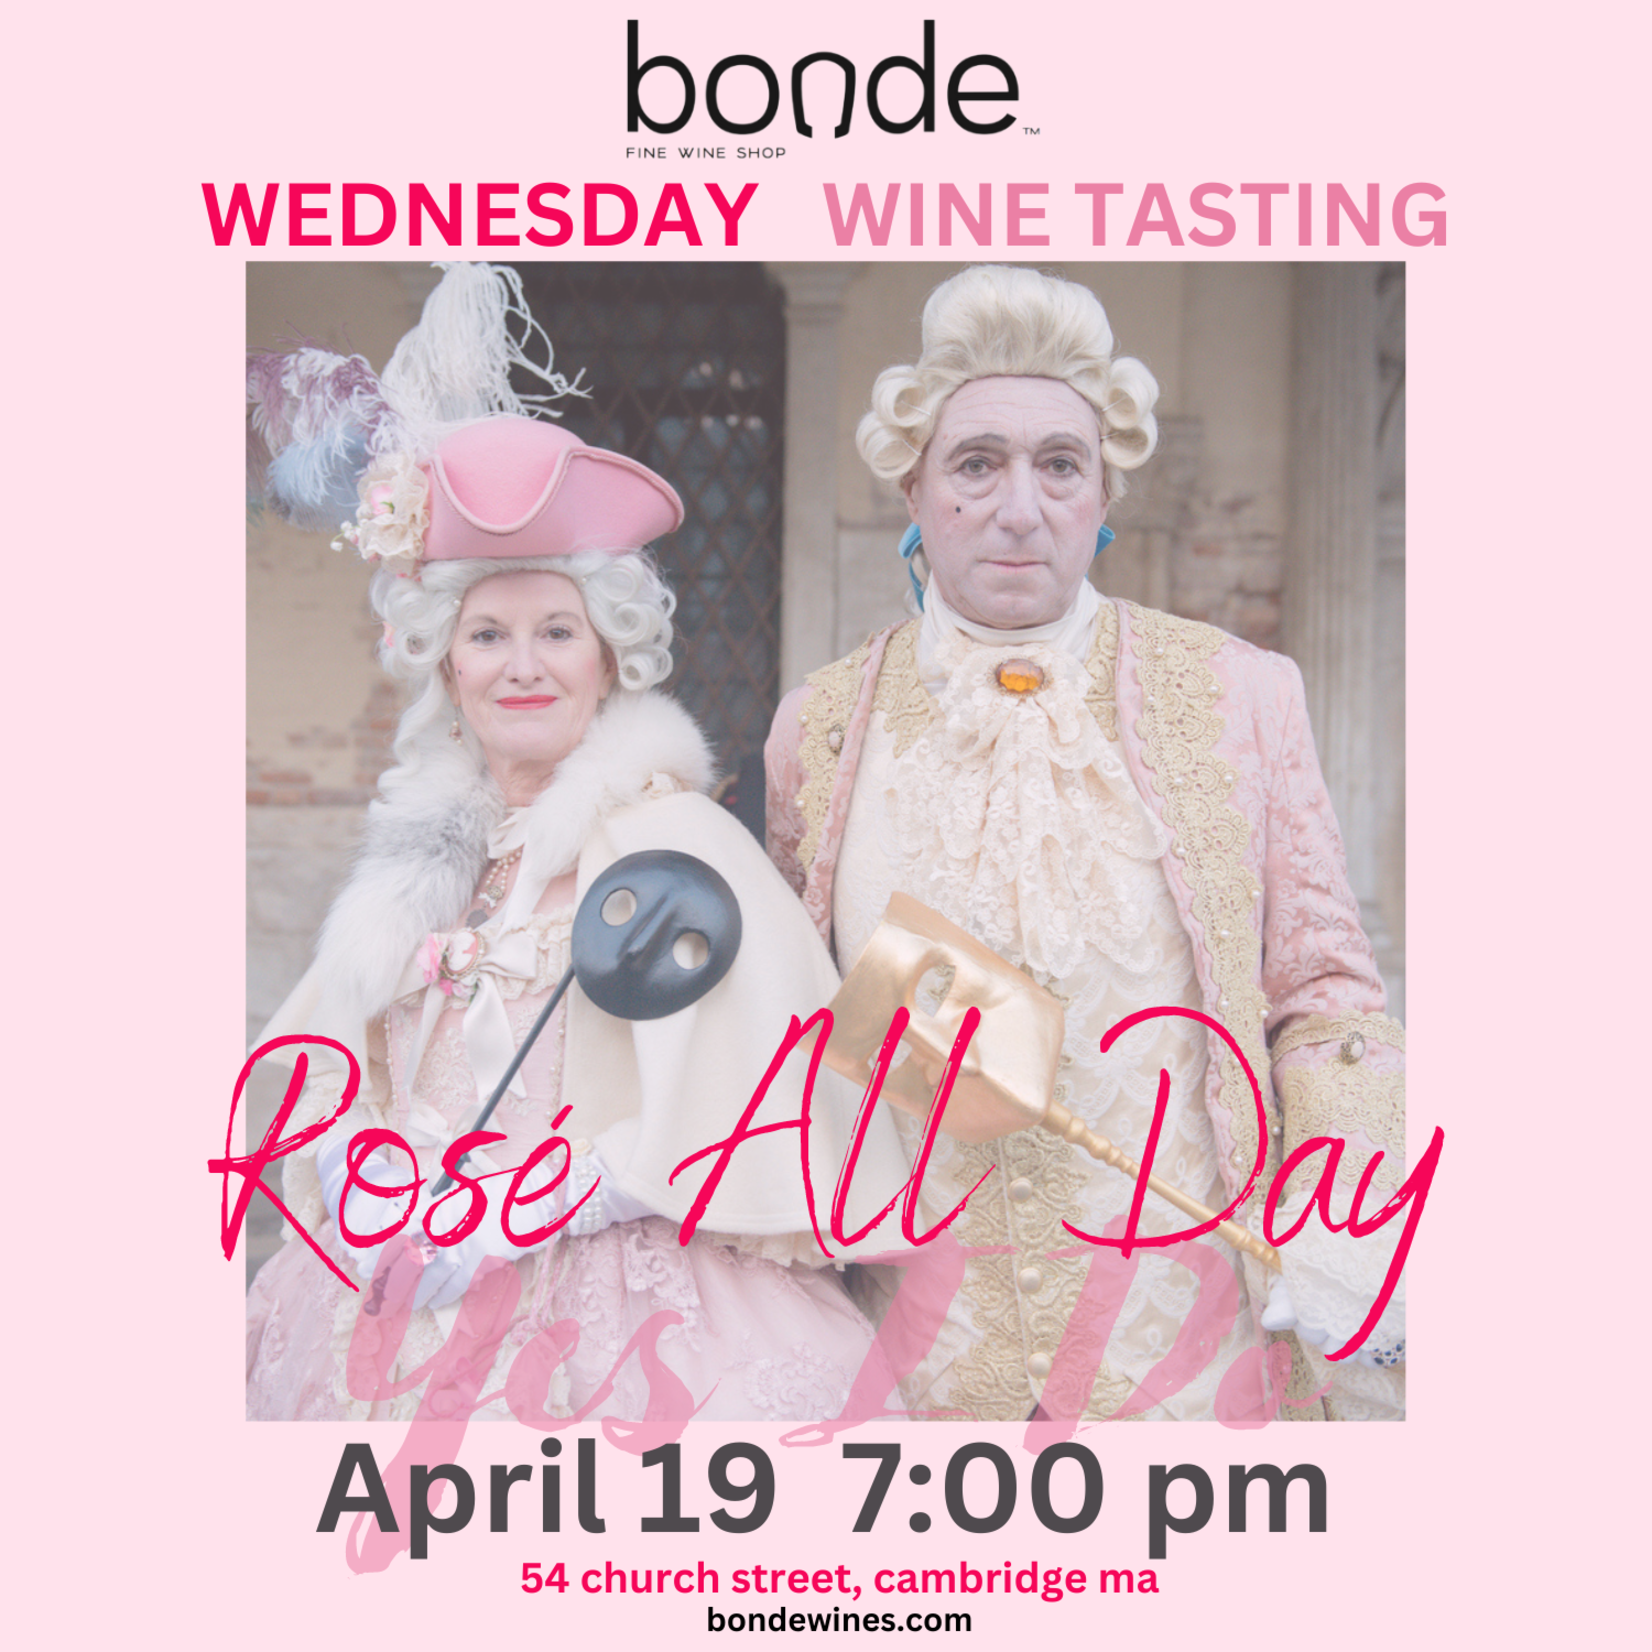 Rosé All Day - Wine Tasting & Class - Wednesday April 19, 7:00 p.m.